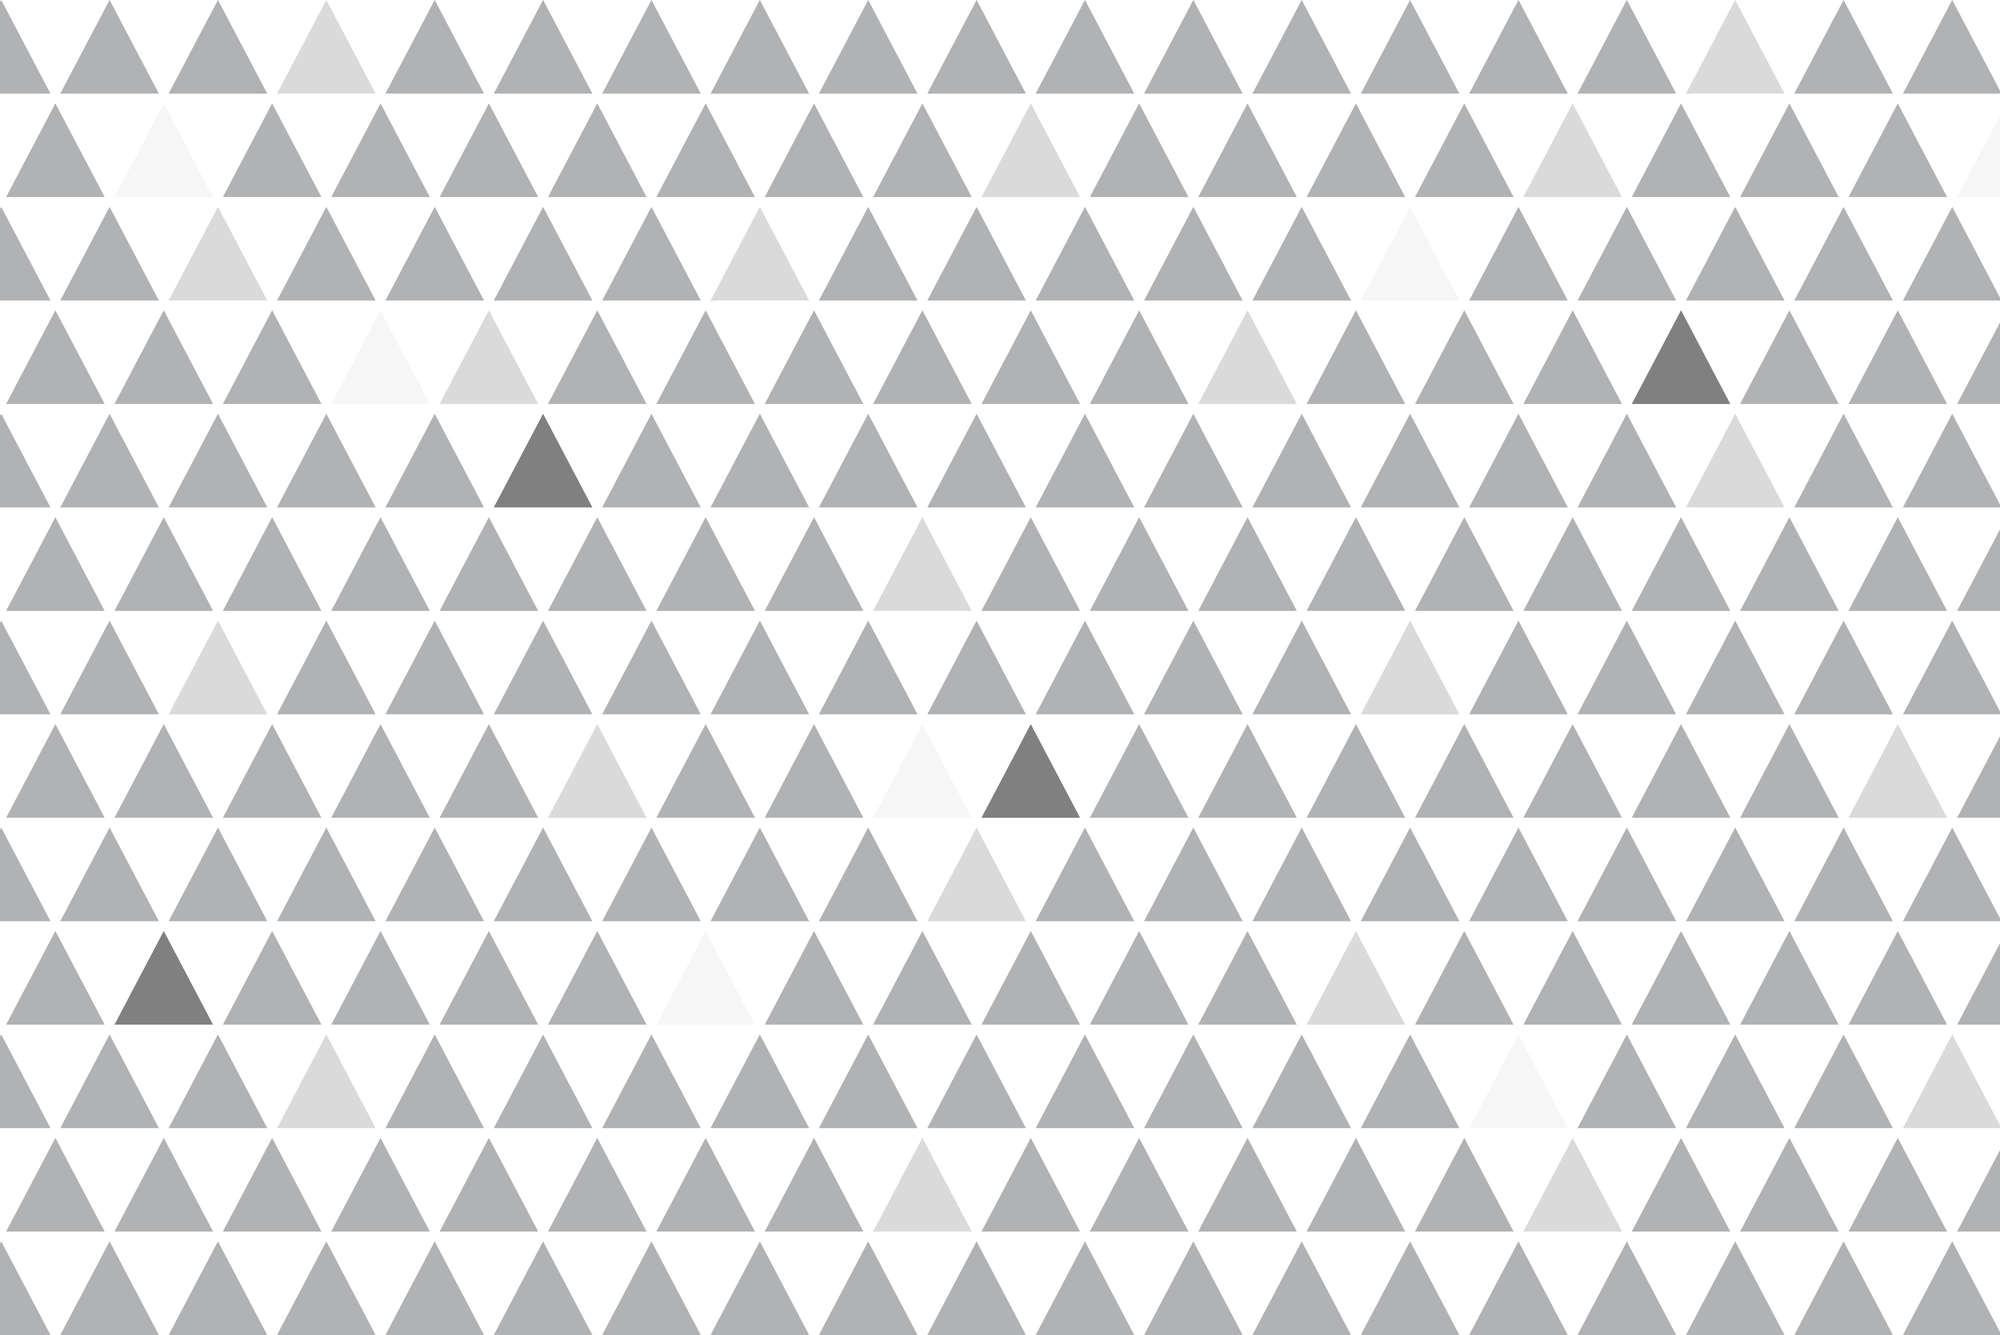             Design wall mural small triangles grey on textured non-woven
        